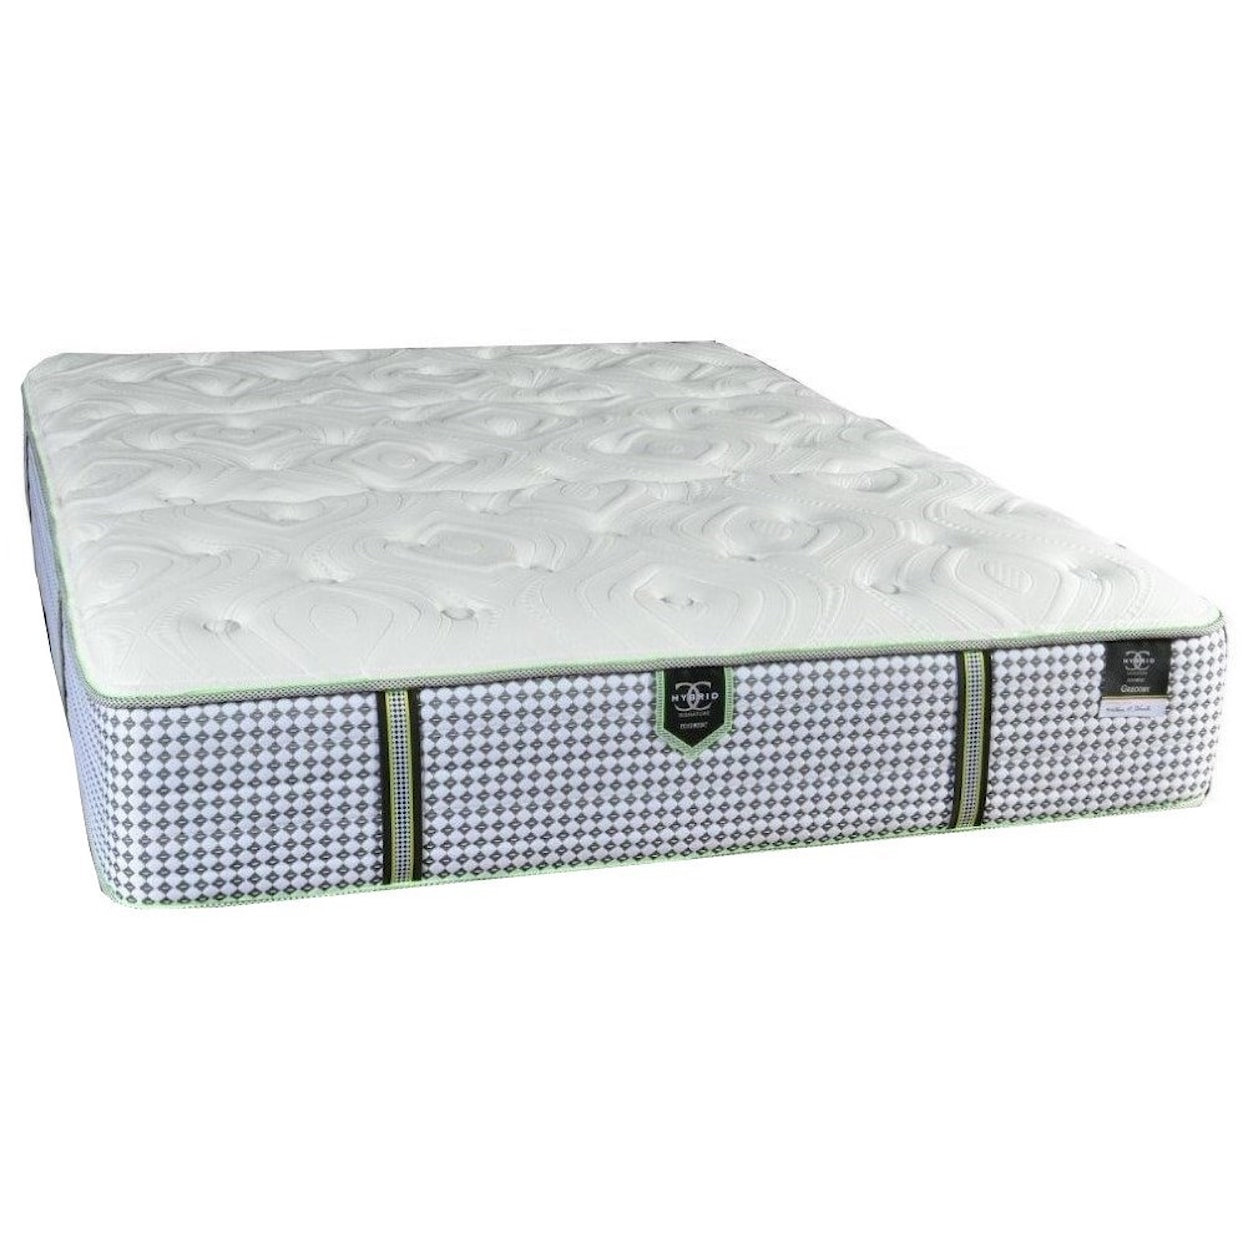 Restonic Gregory Firm Full Pocketed Coil Mattress